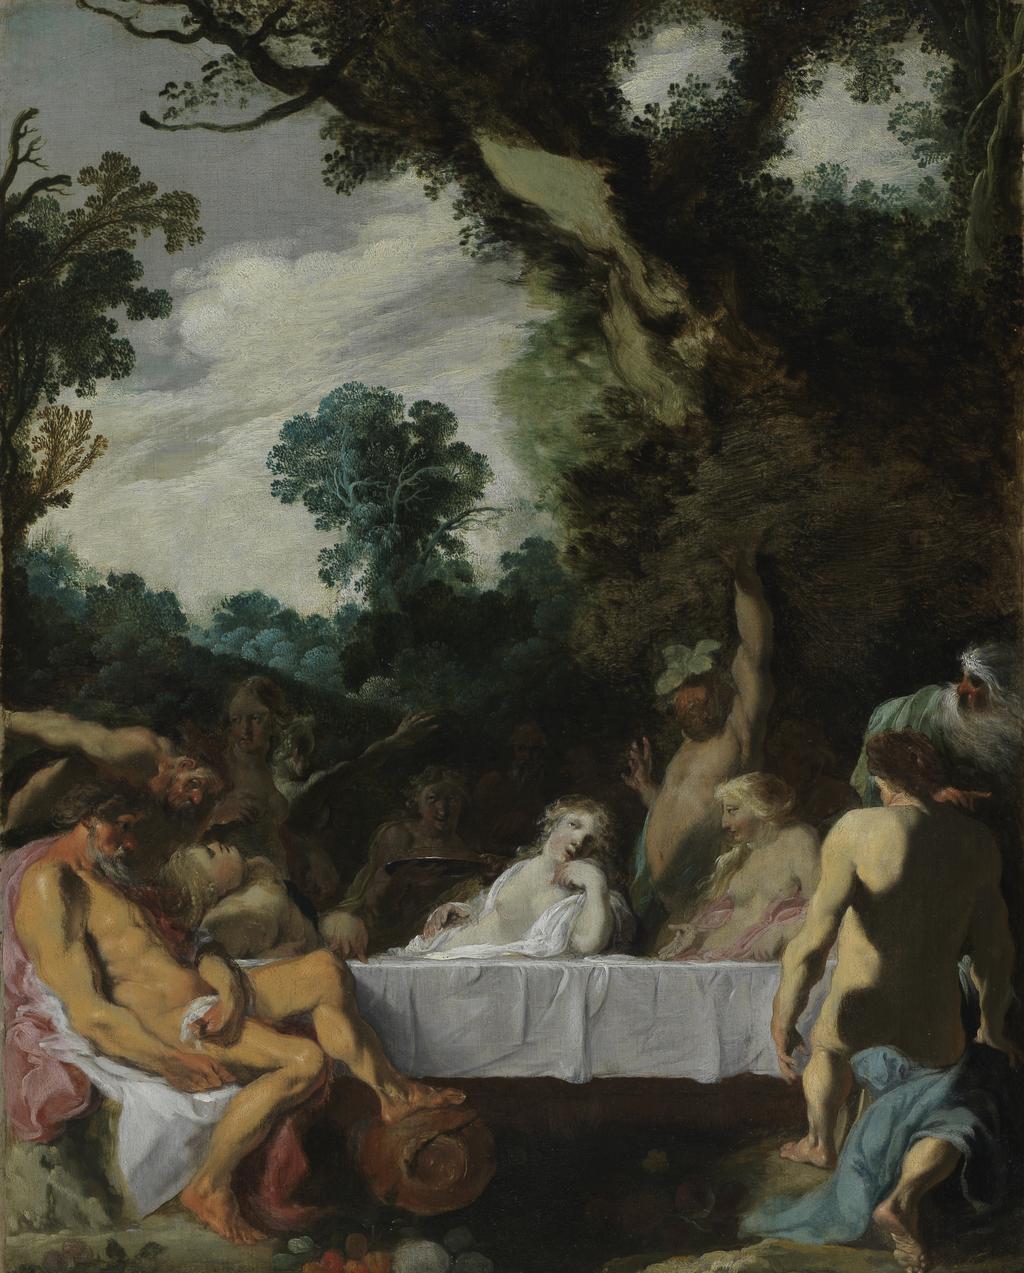 An image of A Bacchanalian feast. Liss, Johann (Pan) (German, c.1590/97-1627/31). Oil on panel, height, panel (wood), 34.2 cm, width, panel (wood), 27.3 cm, circa 1617. From the Cunliffe Fund with contributions from the National Art Collections Fund and the Victoria and Albert Museum Grant-in-Aid.